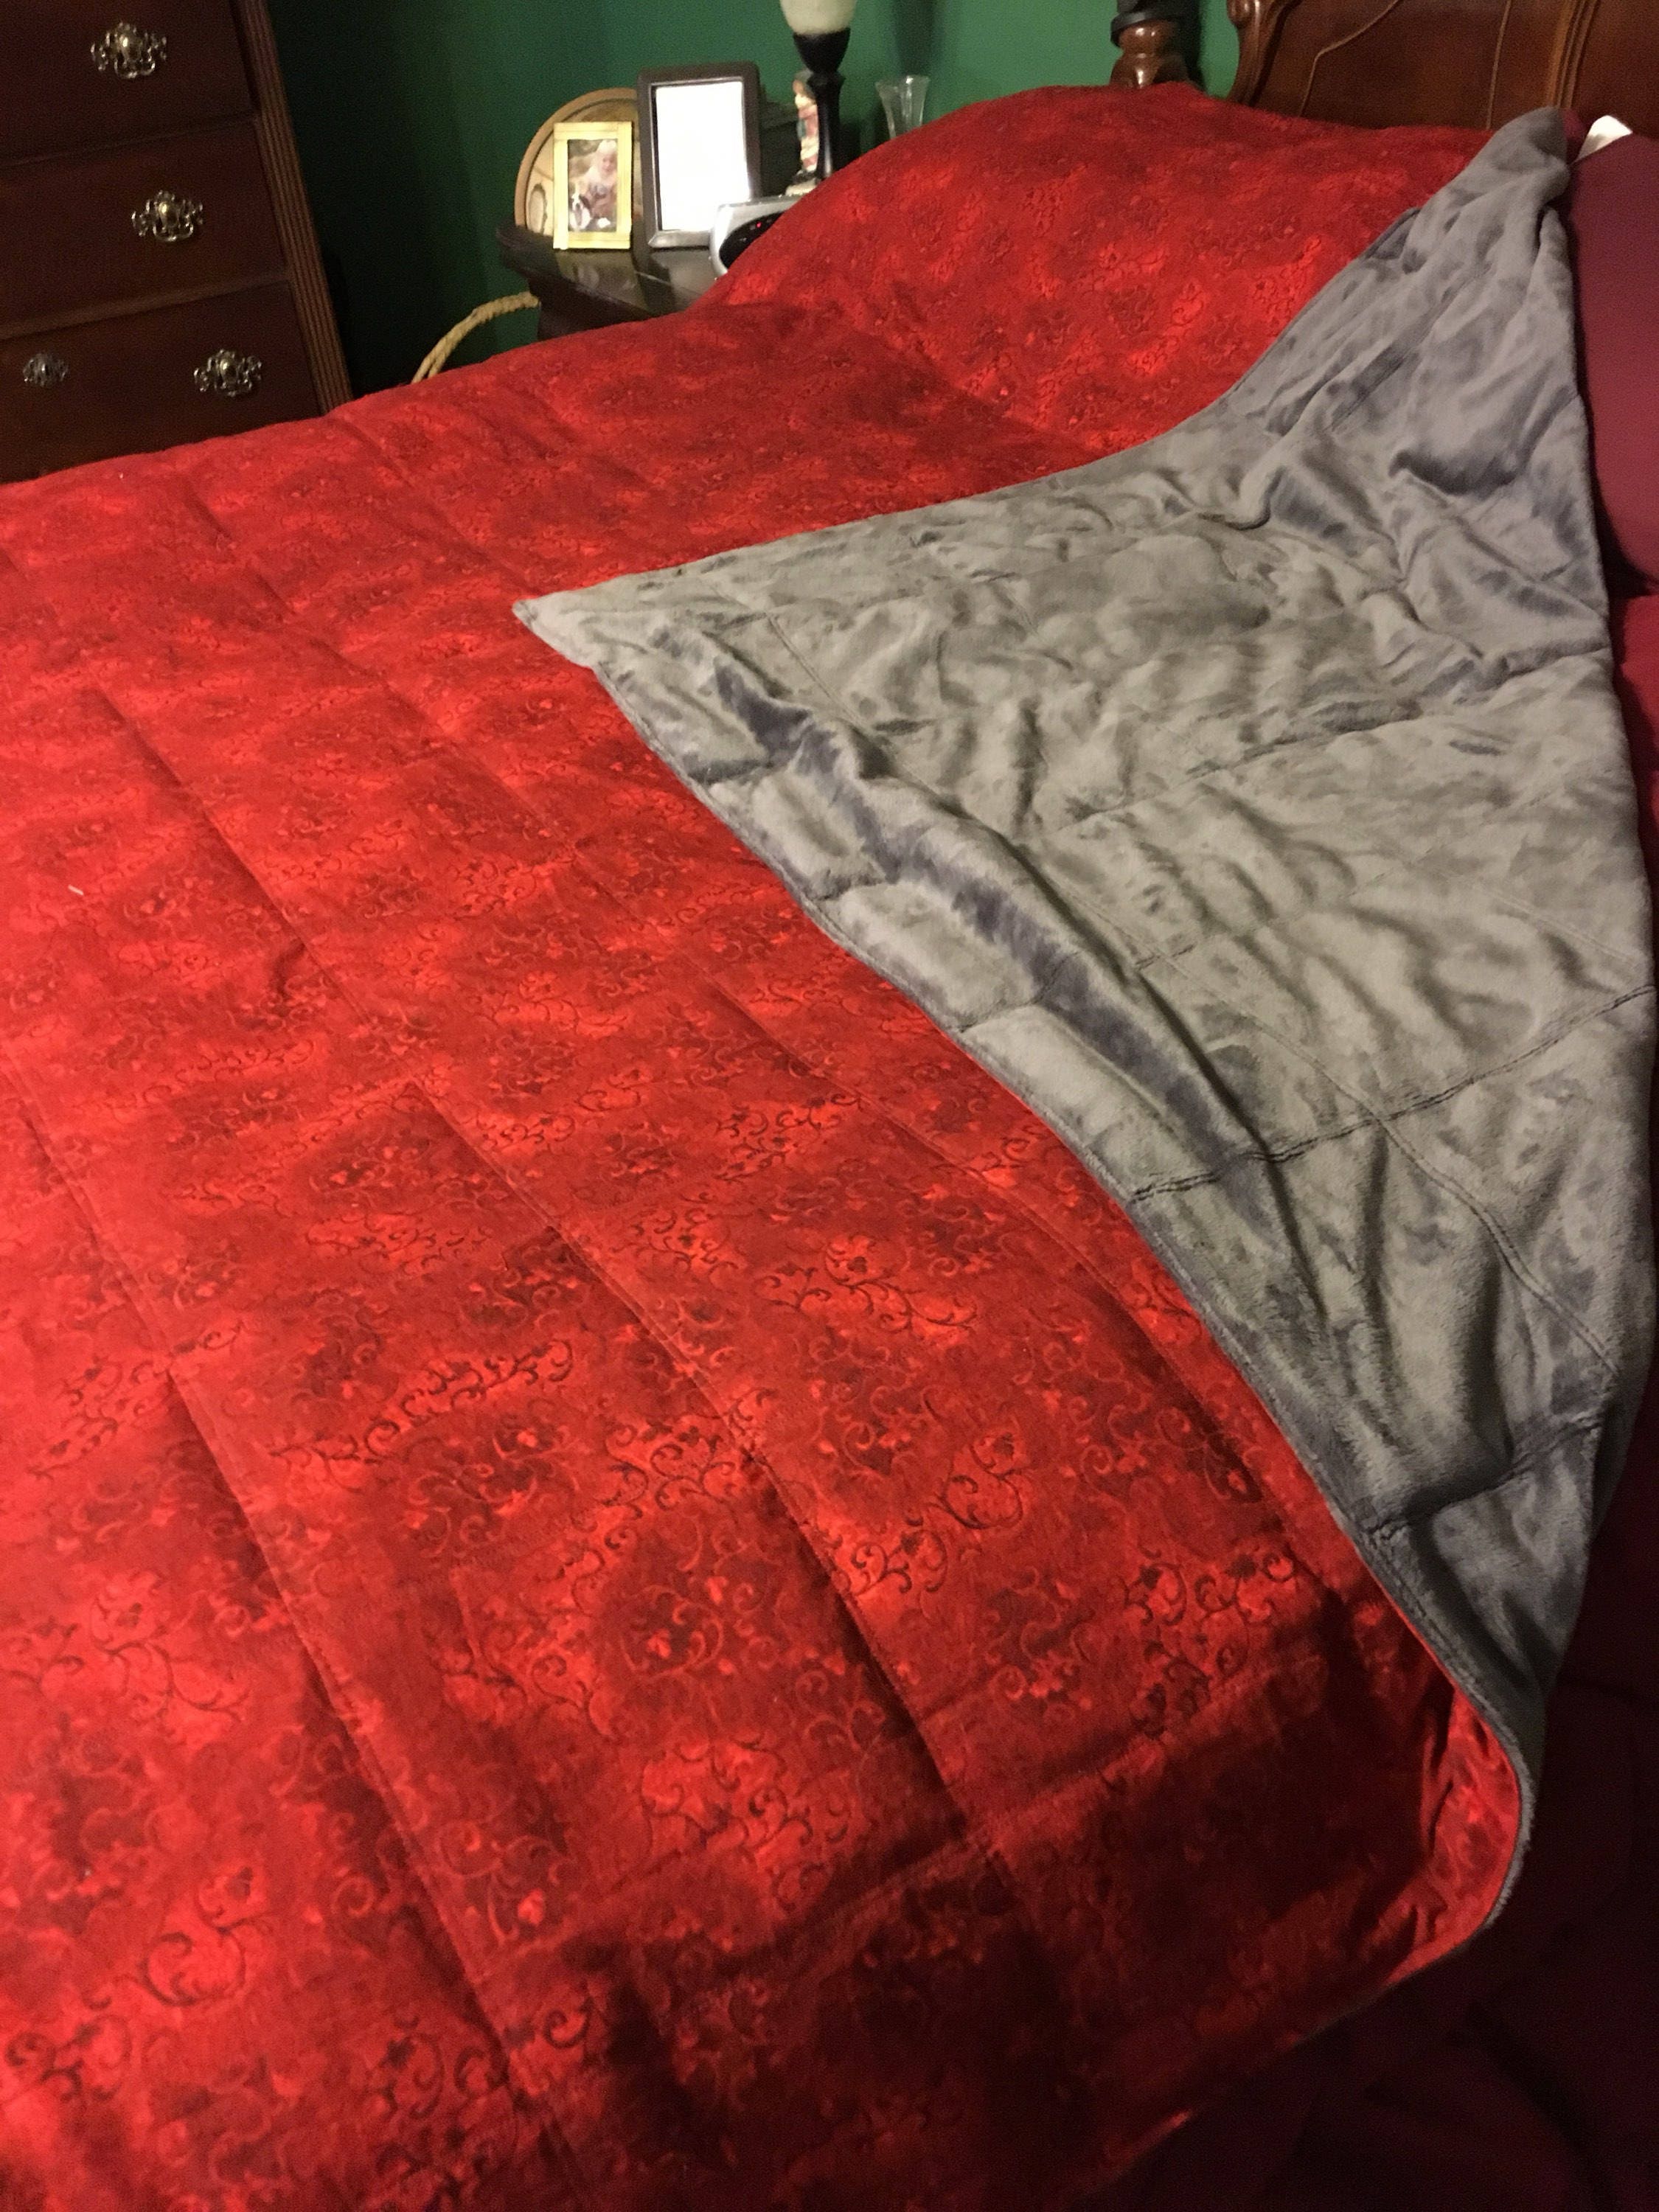 King Size Weighted Blanket - 85 x 100 - Custom Made